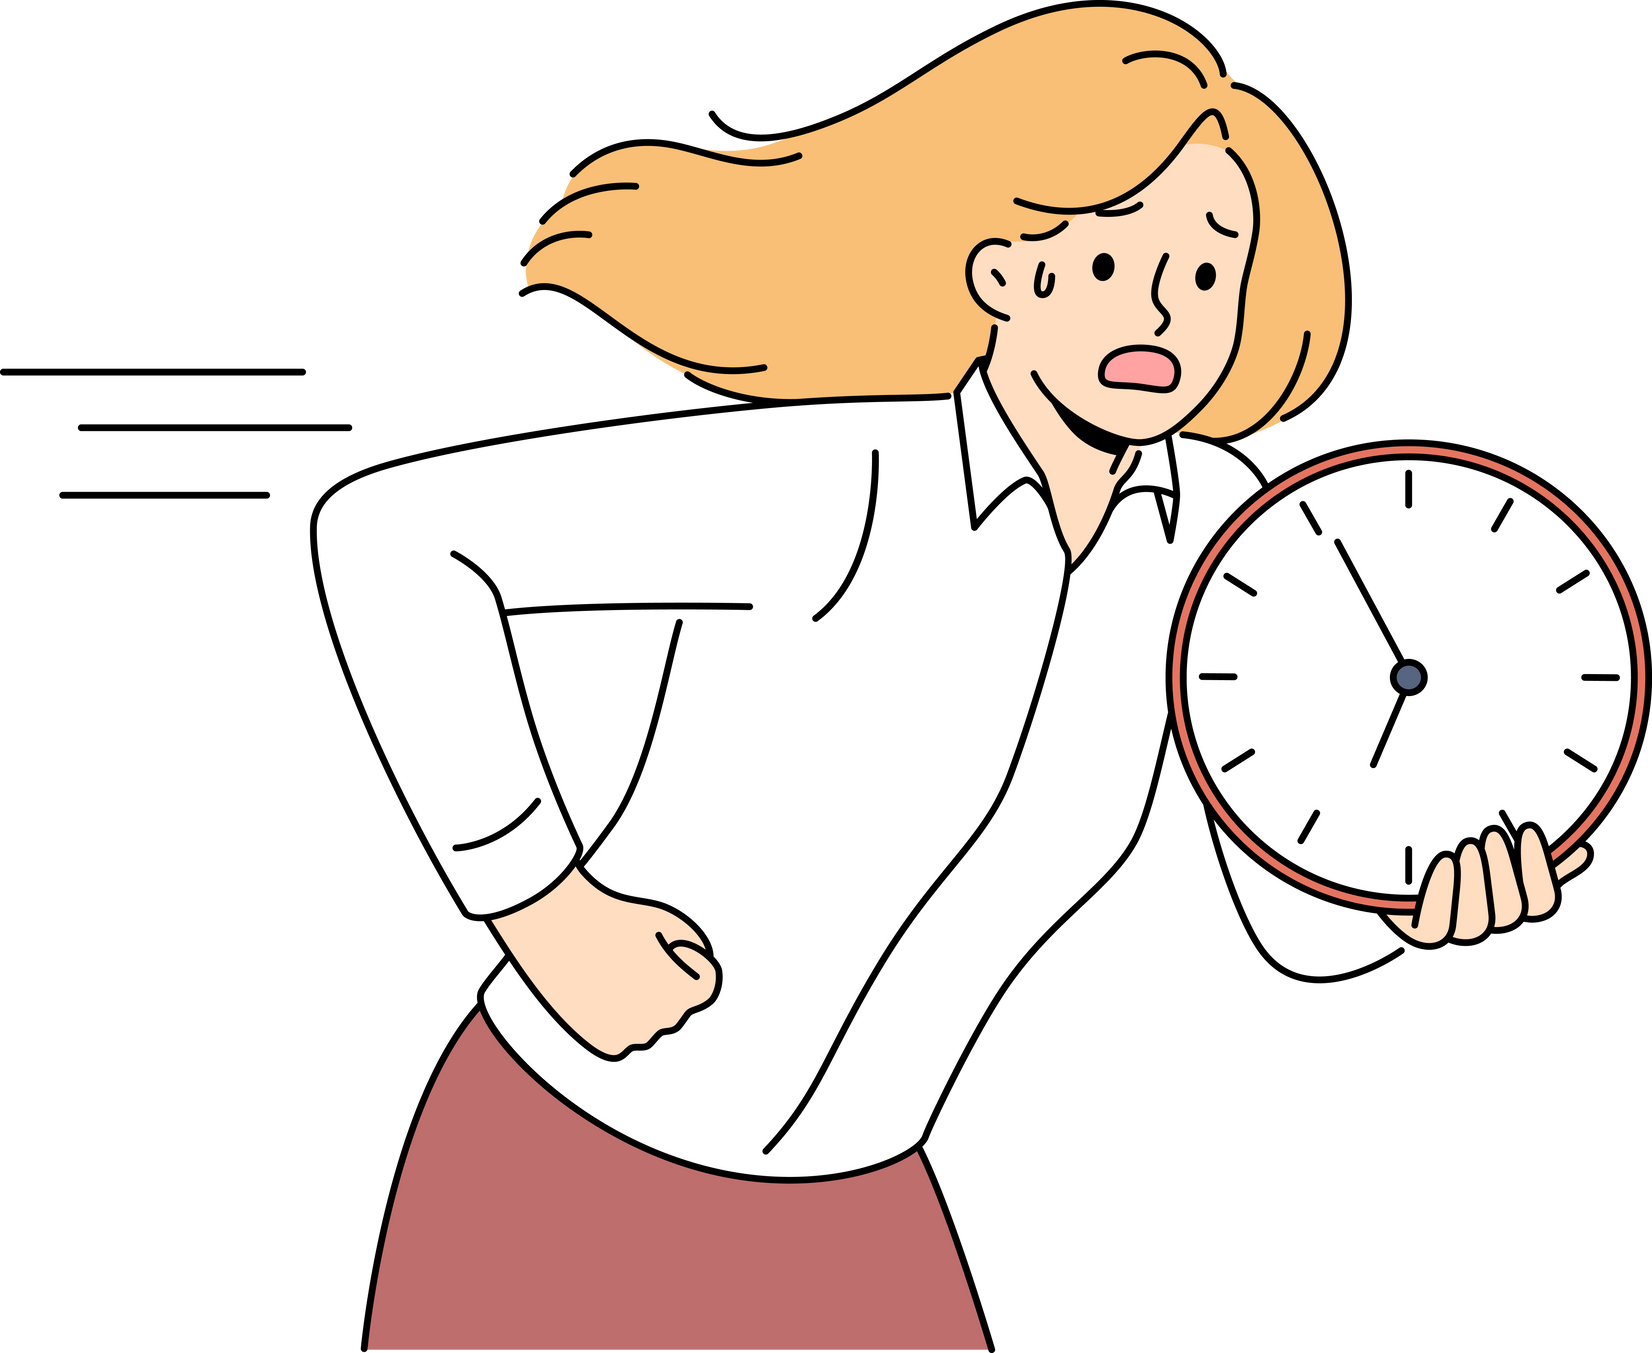 Running woman is holding clock and is nervous trying to comply with deadlines and complete work